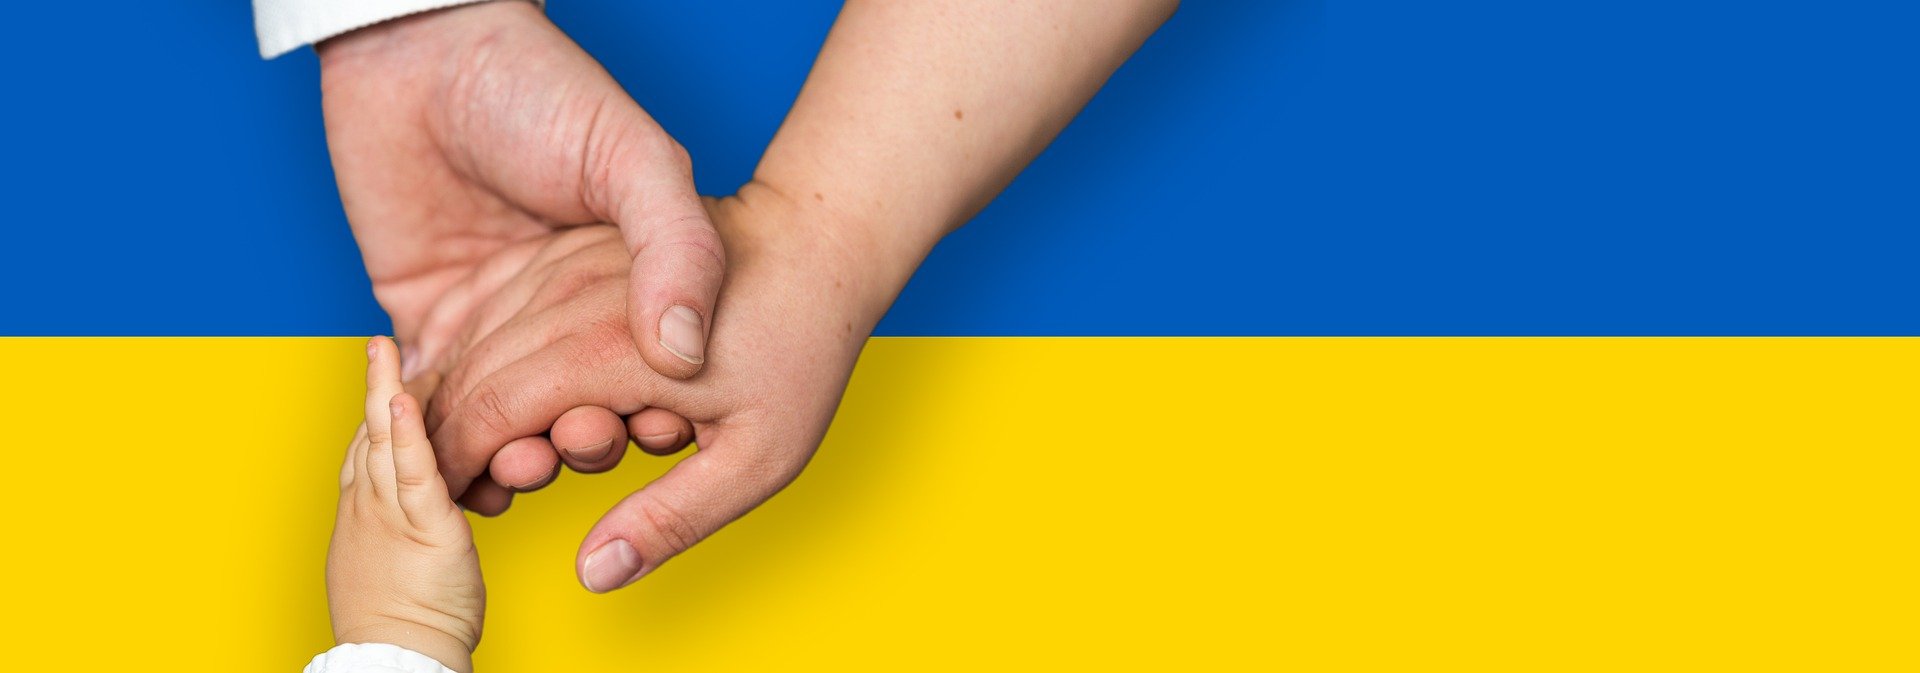 OPINION ARTICLE: Ukrainian refugees are vulnerable to trafficking and abuse – we must protect them